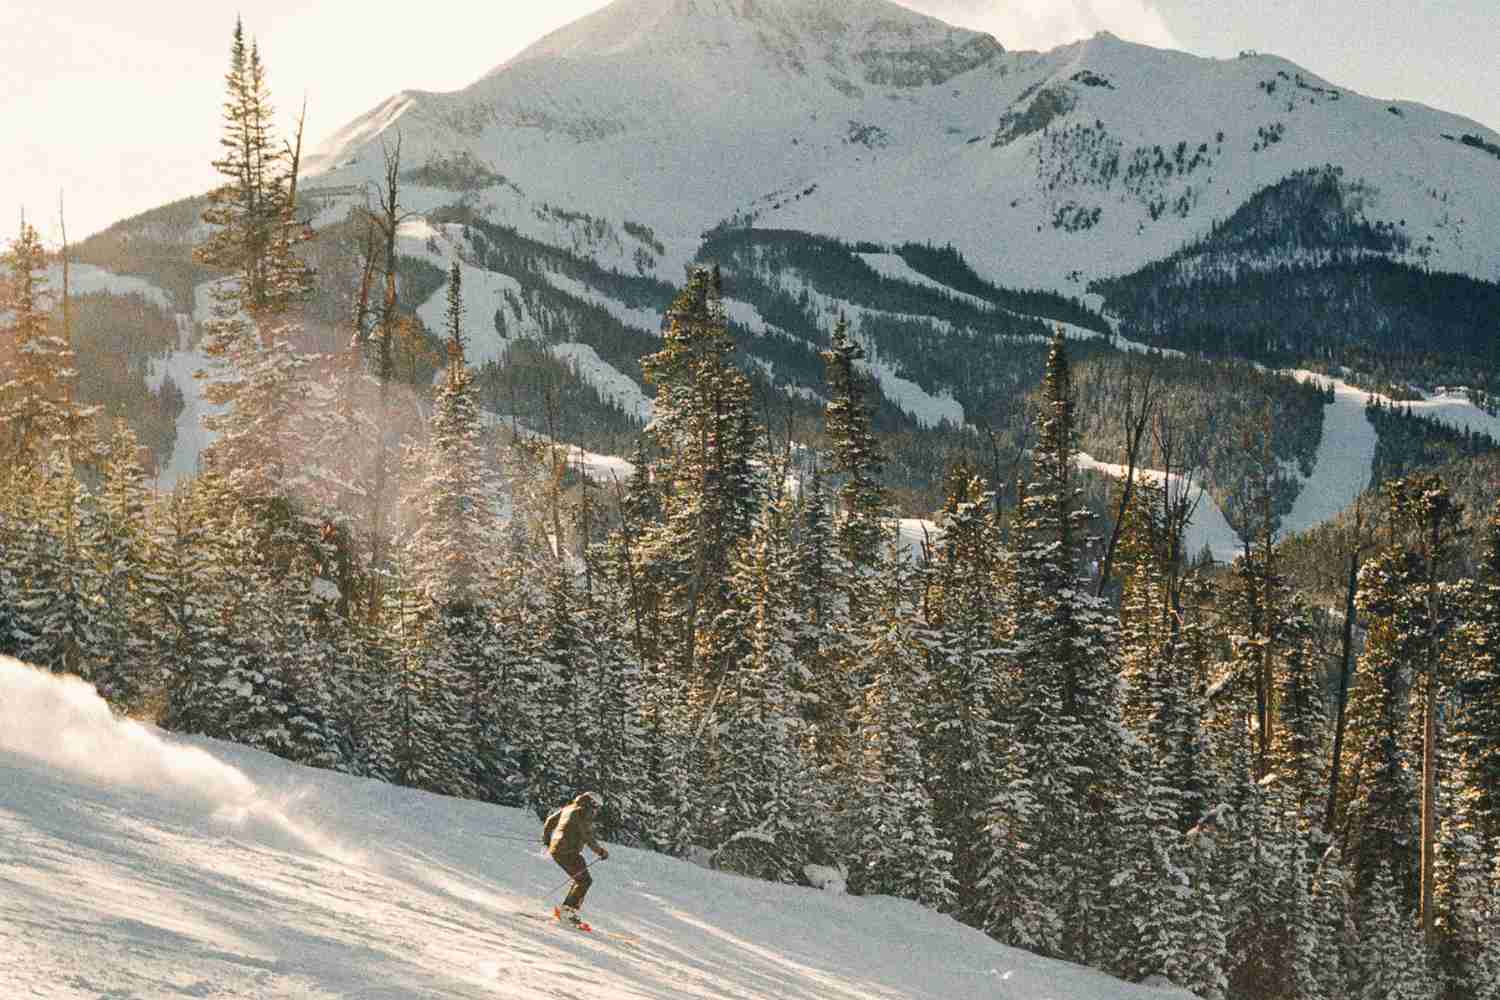 How to have an epic ski season in bozeman